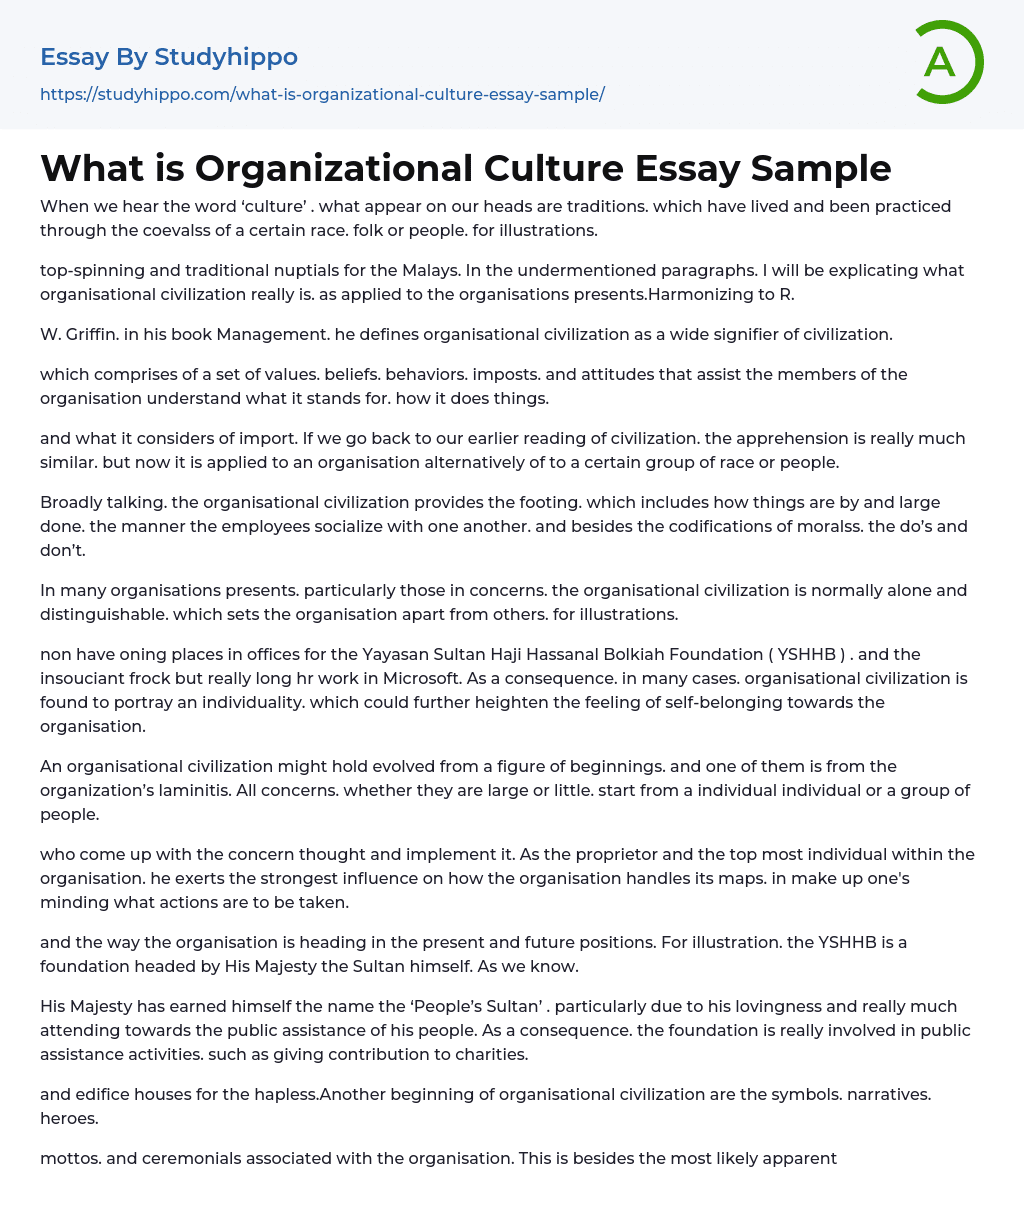 What is Organizational Culture Essay Sample